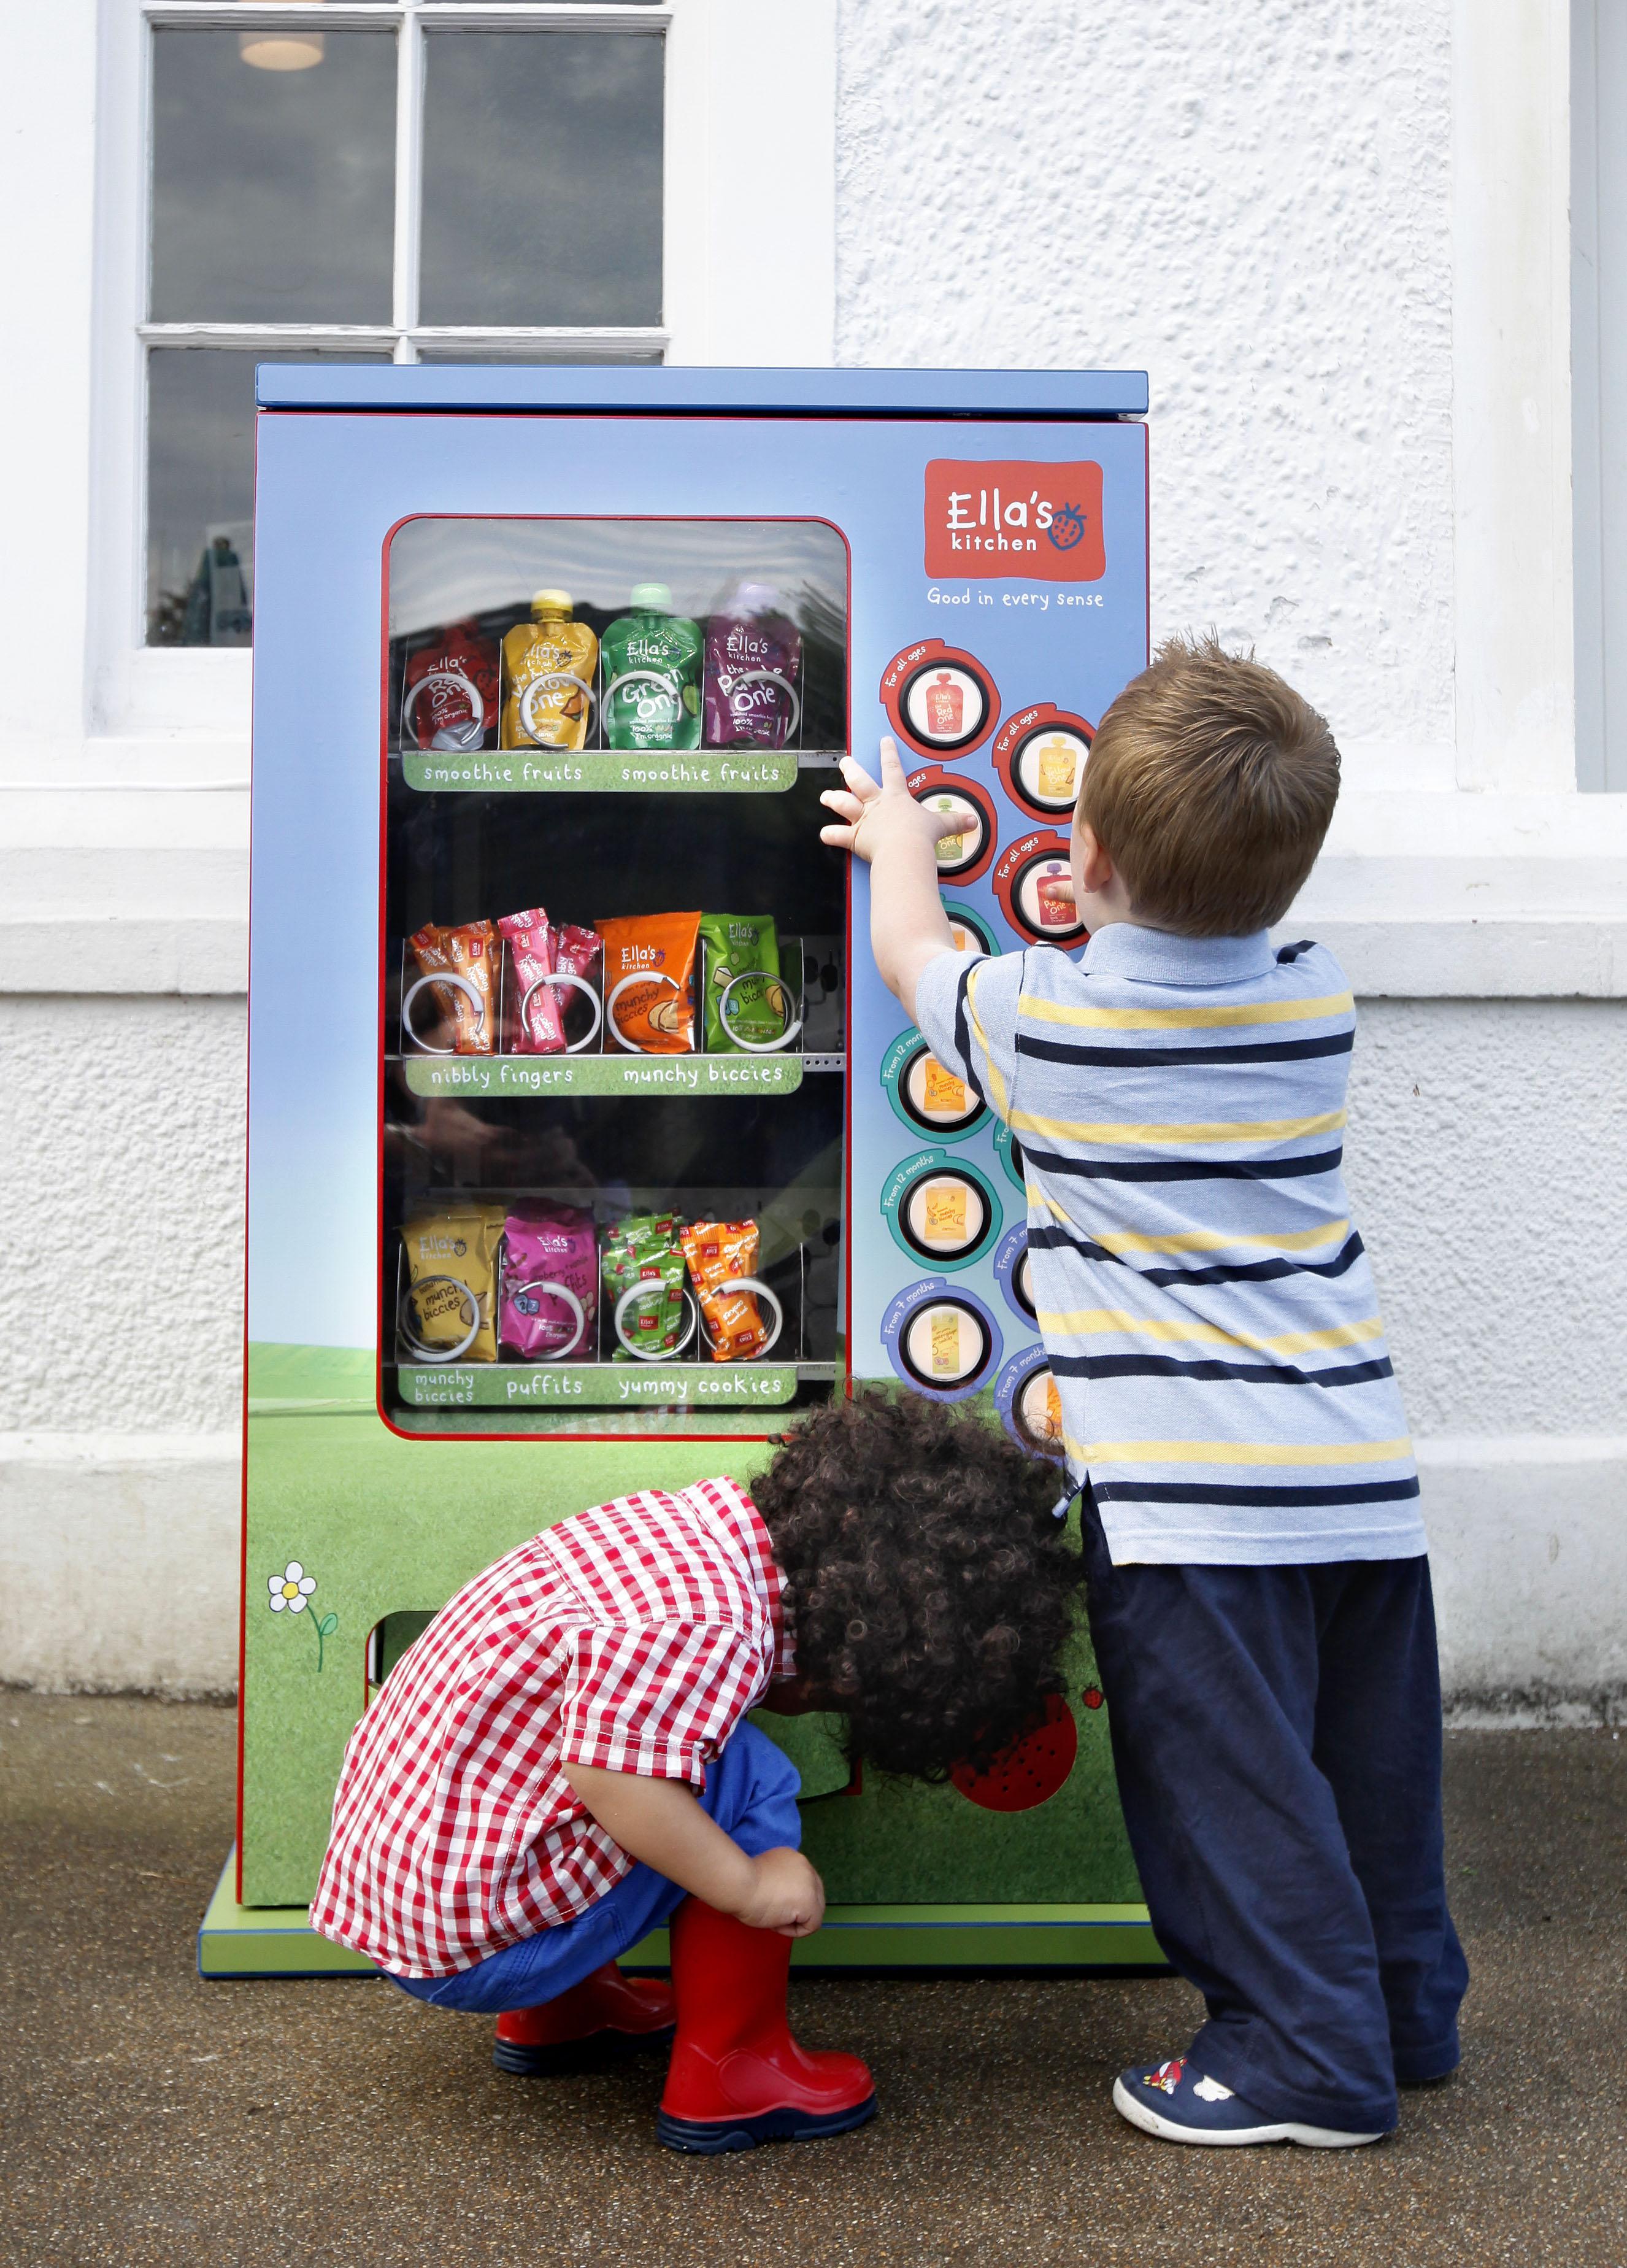 MINI MUNCH - World’s first baby vending machine for healthy snacks on